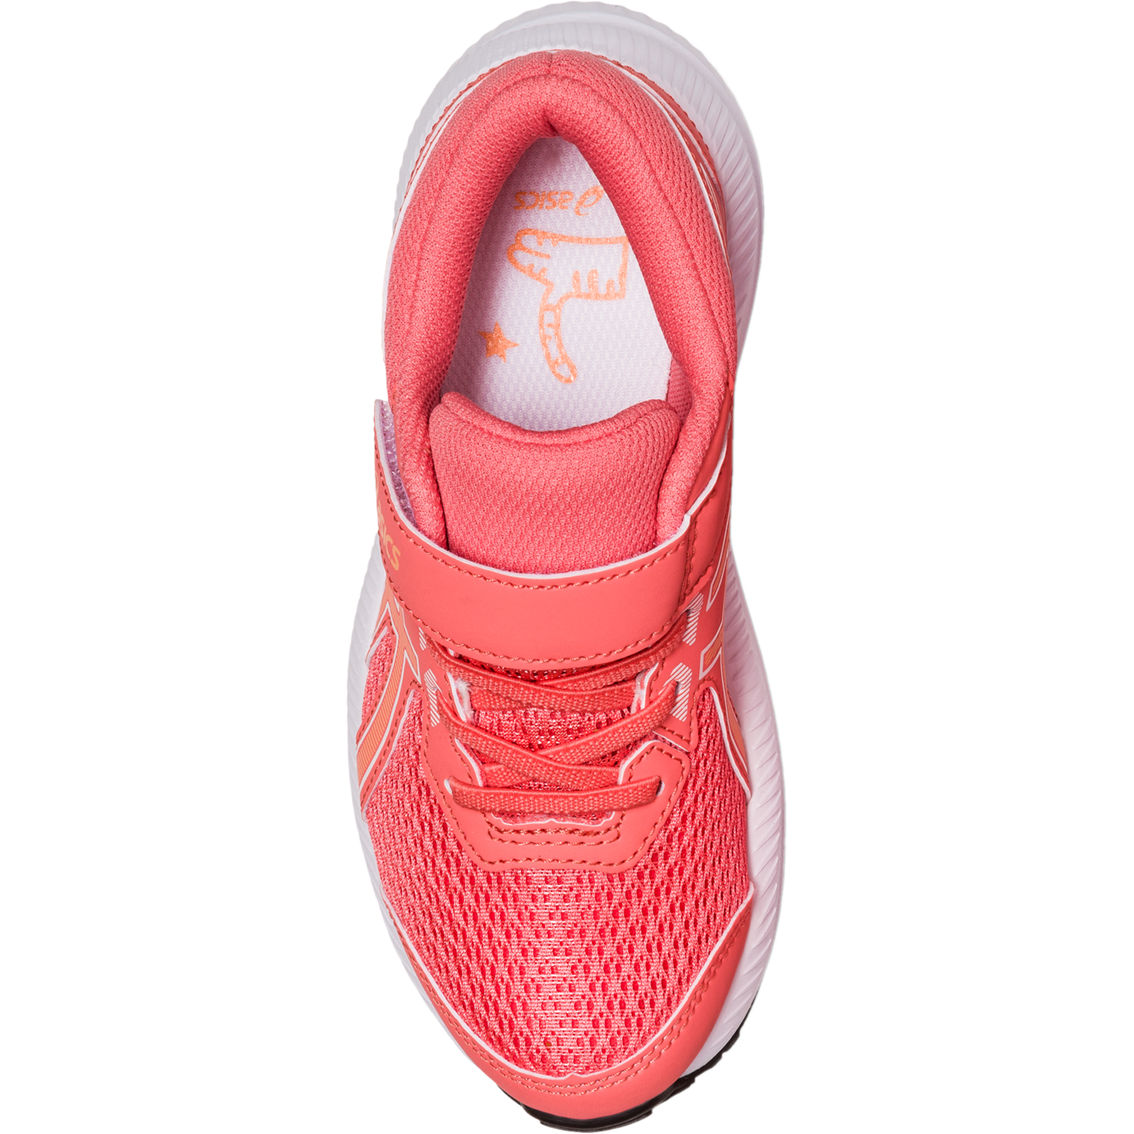 ASICS Preschool Girl's Contend 8 Shoes - Image 4 of 7